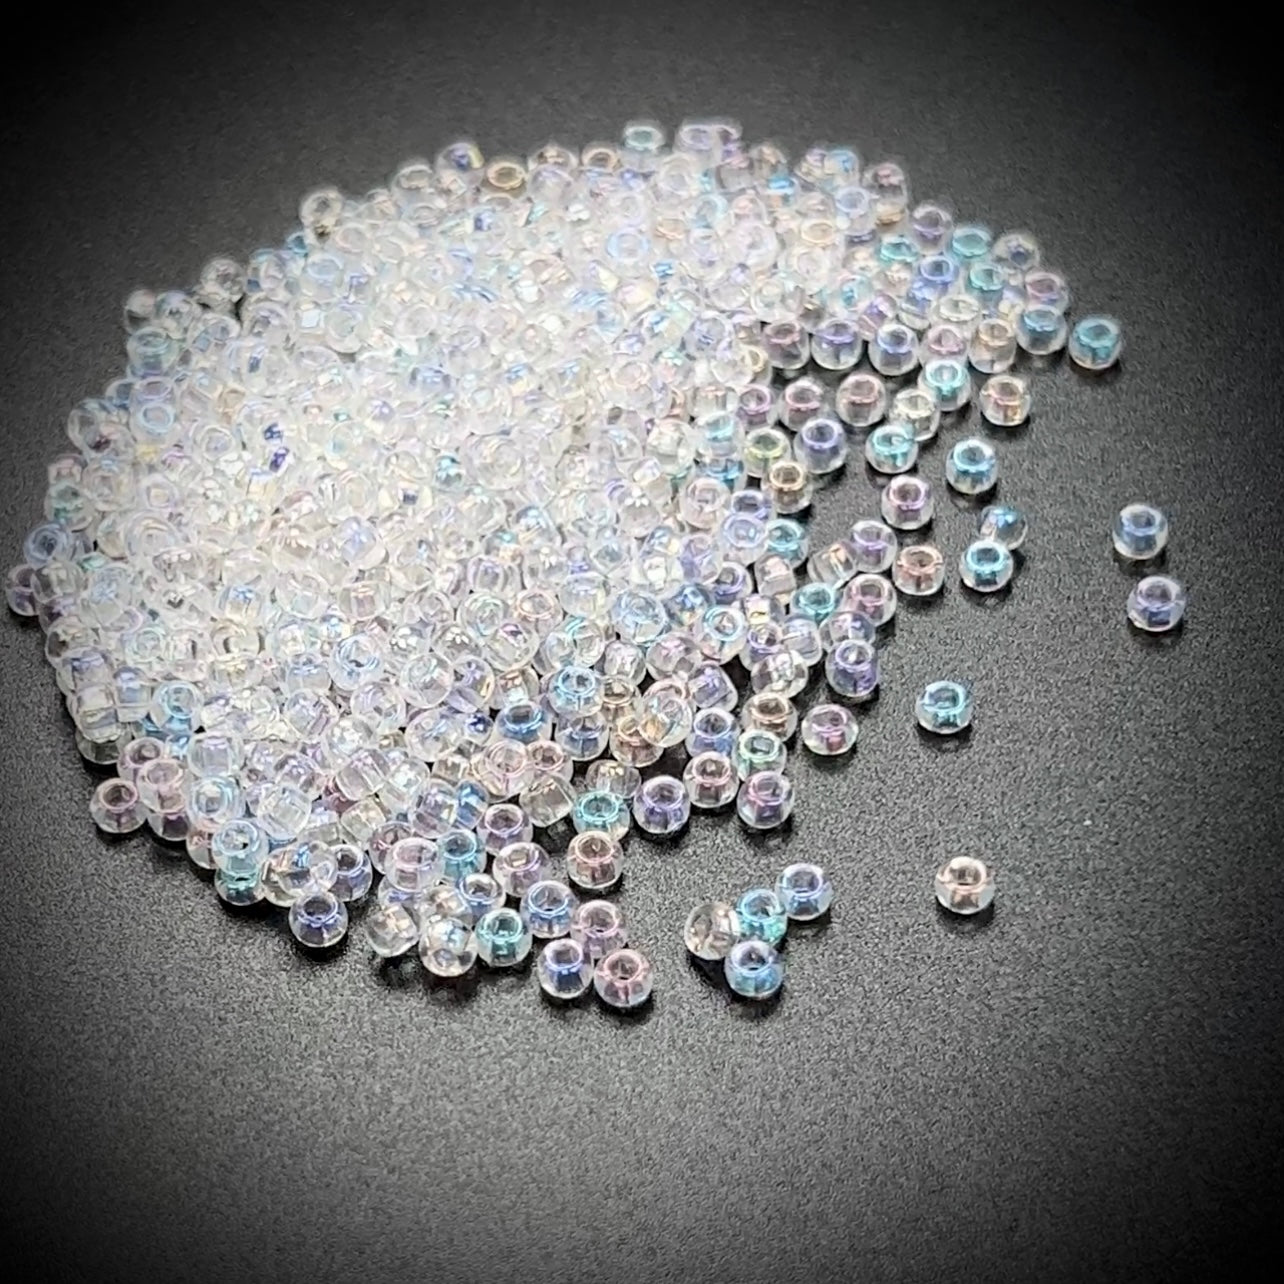 Rocailles size 7/0 (3.5mm) Crystal AB coated, Preciosa Ornela Traditional Czech Glass Seed Beads, 30grams (1 oz), P972